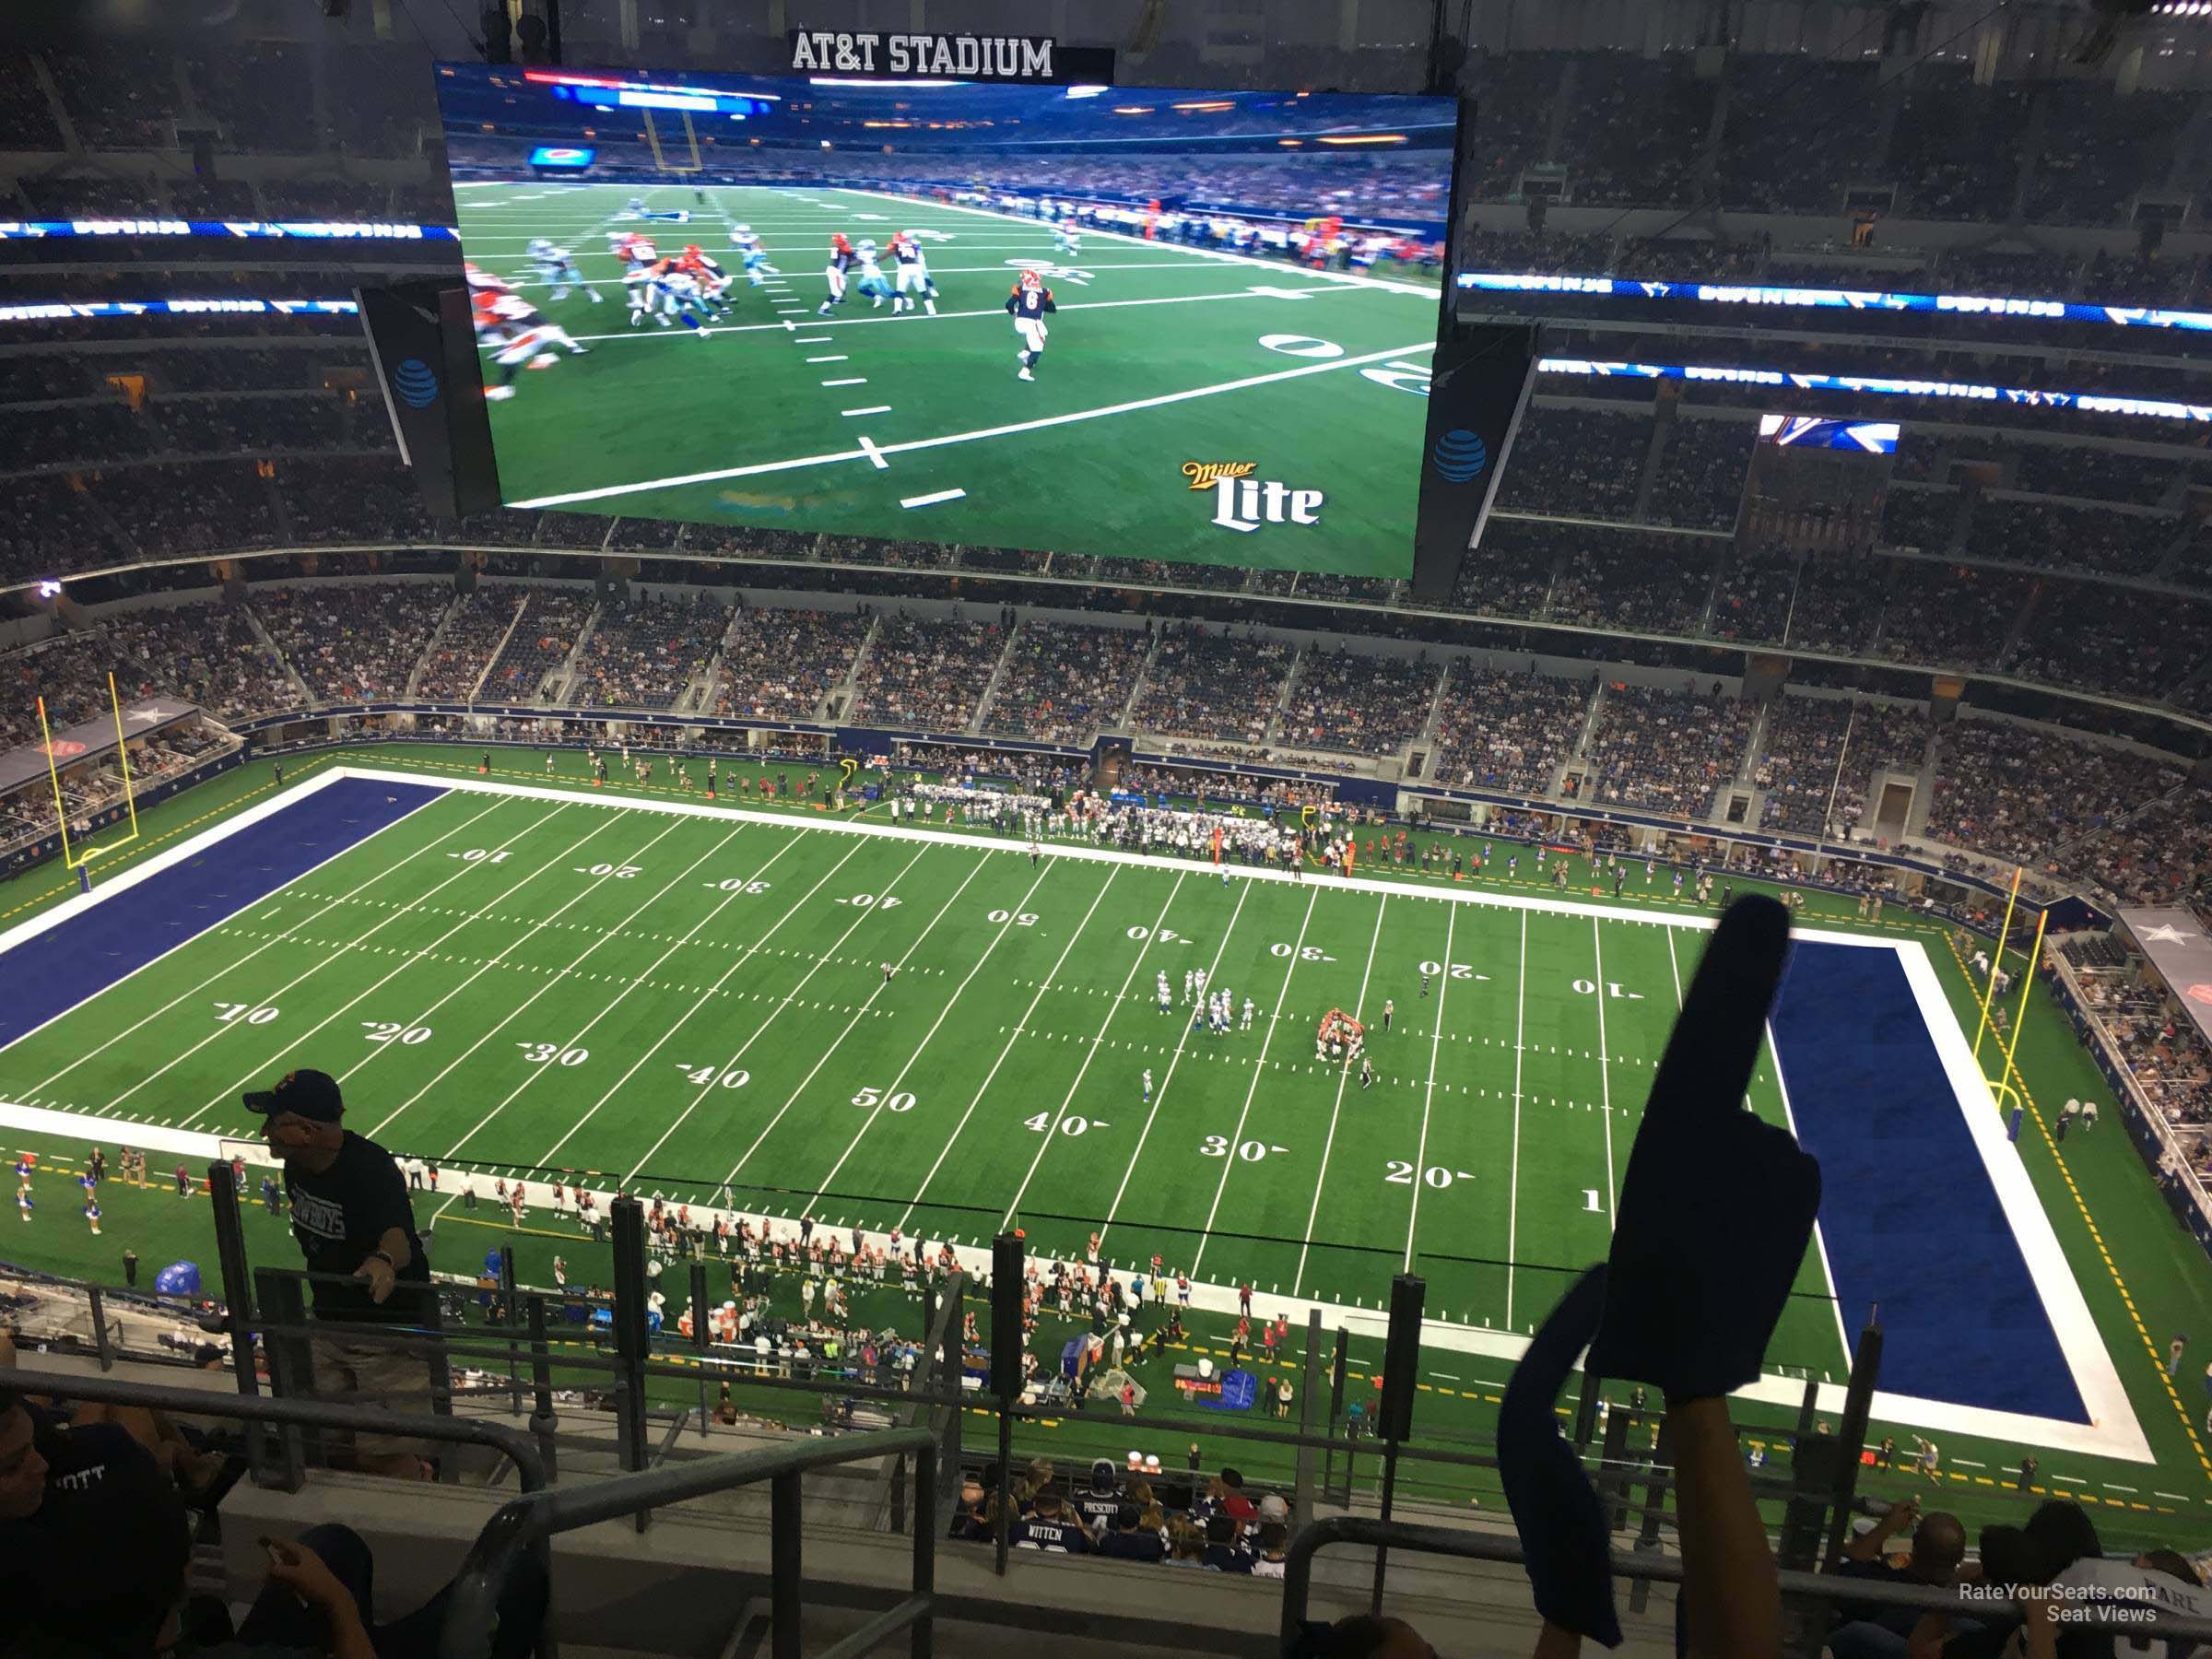 section 447, row 22 seat view  for football - at&t stadium (cowboys stadium)